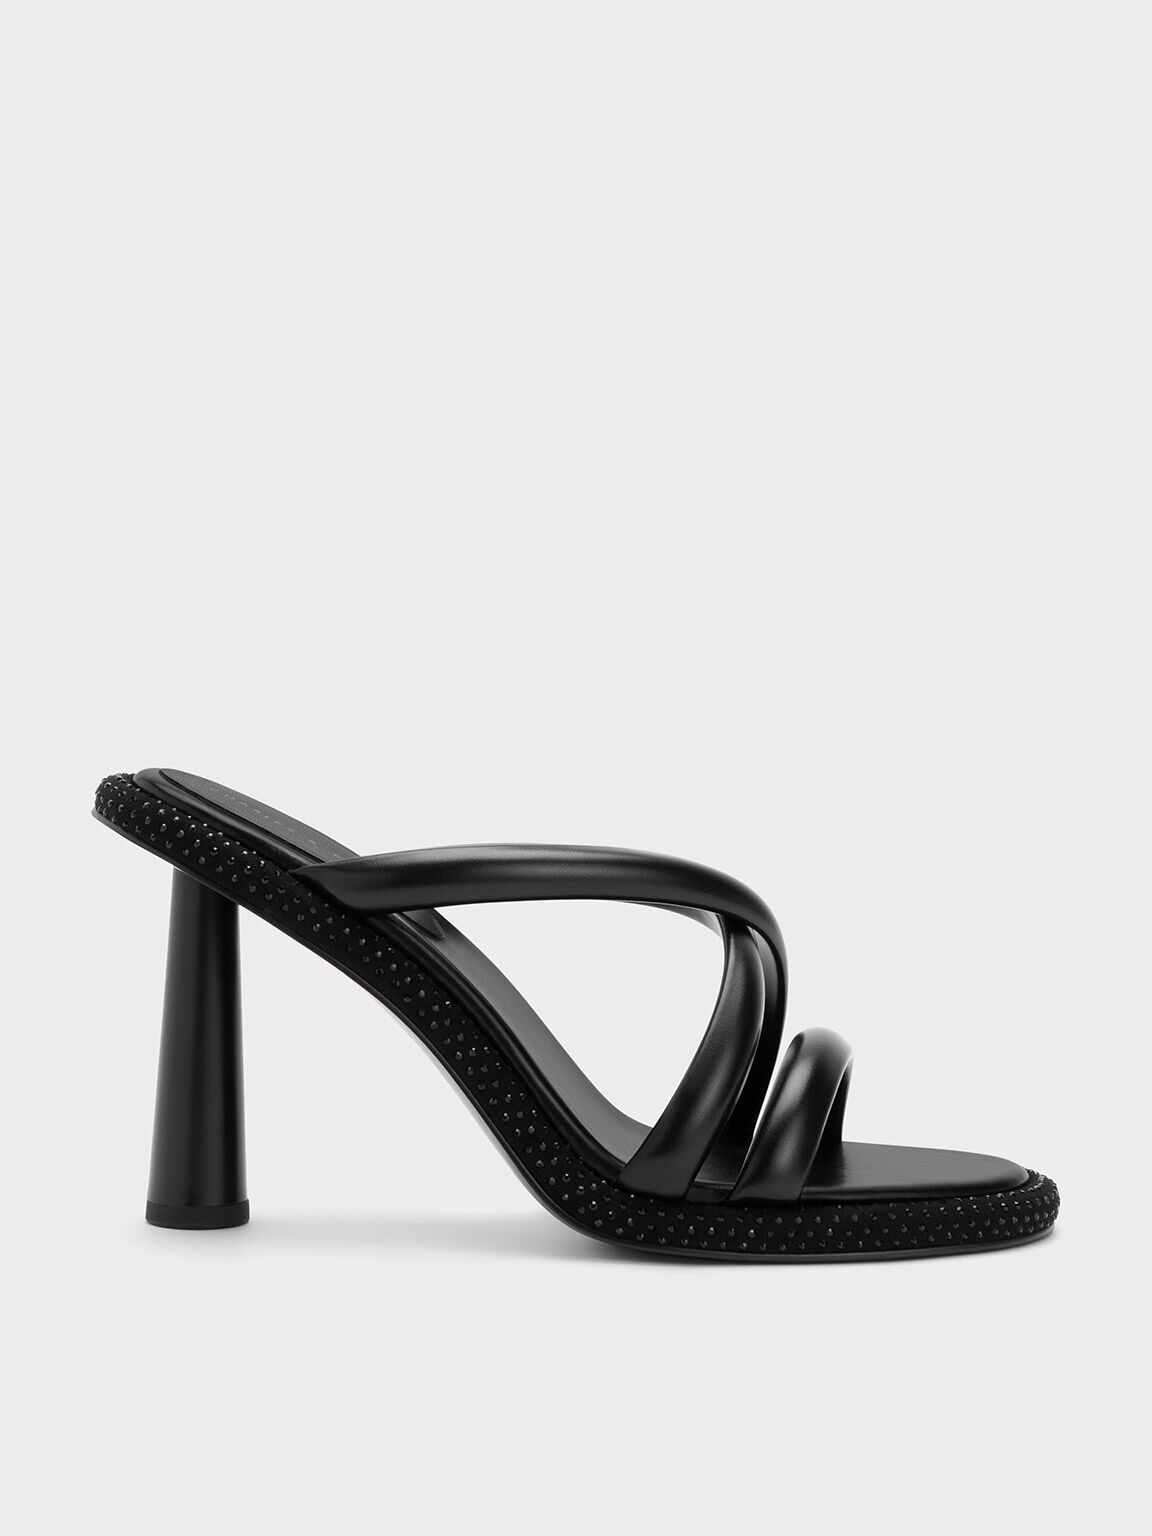 Charles & Keith - Women's Demi Recycled Polyester Slingback Pumps, Black, US 4